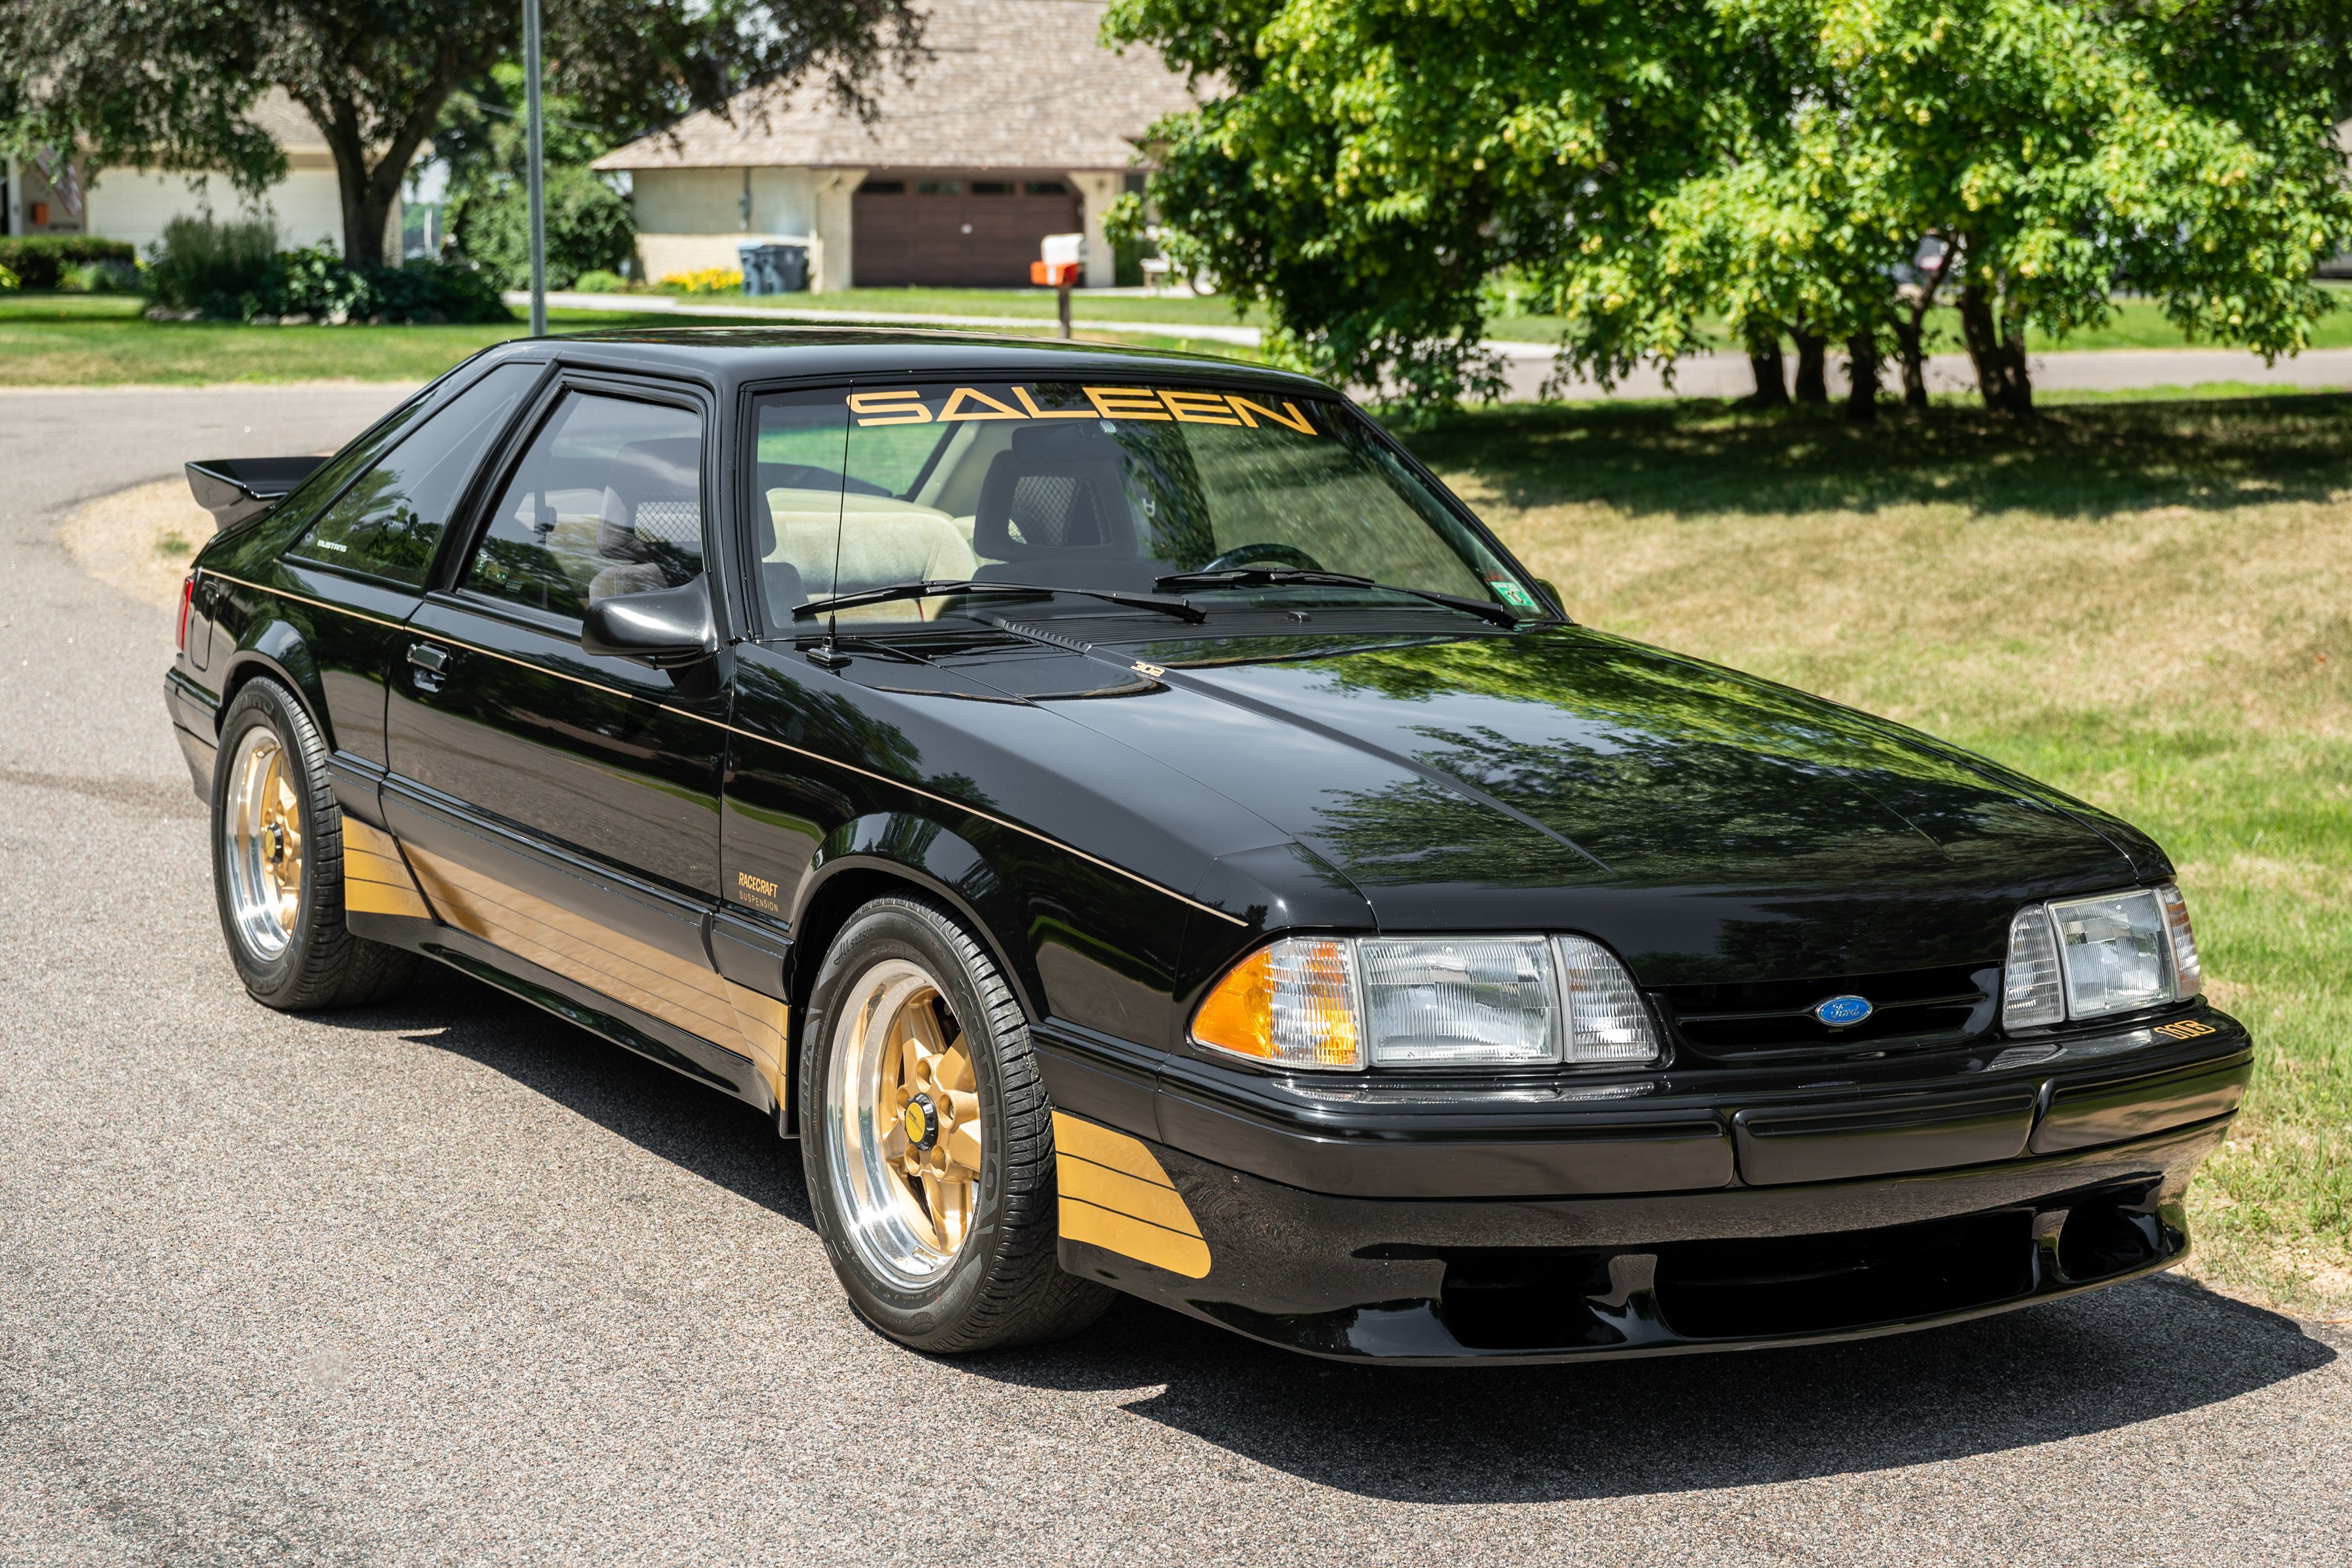 1989_ford_mustang_1989_ford_mustang_71bfea03-ff9b-4a3a-a011-8f6913e7467f-dKulbI-18962-18963.jpg